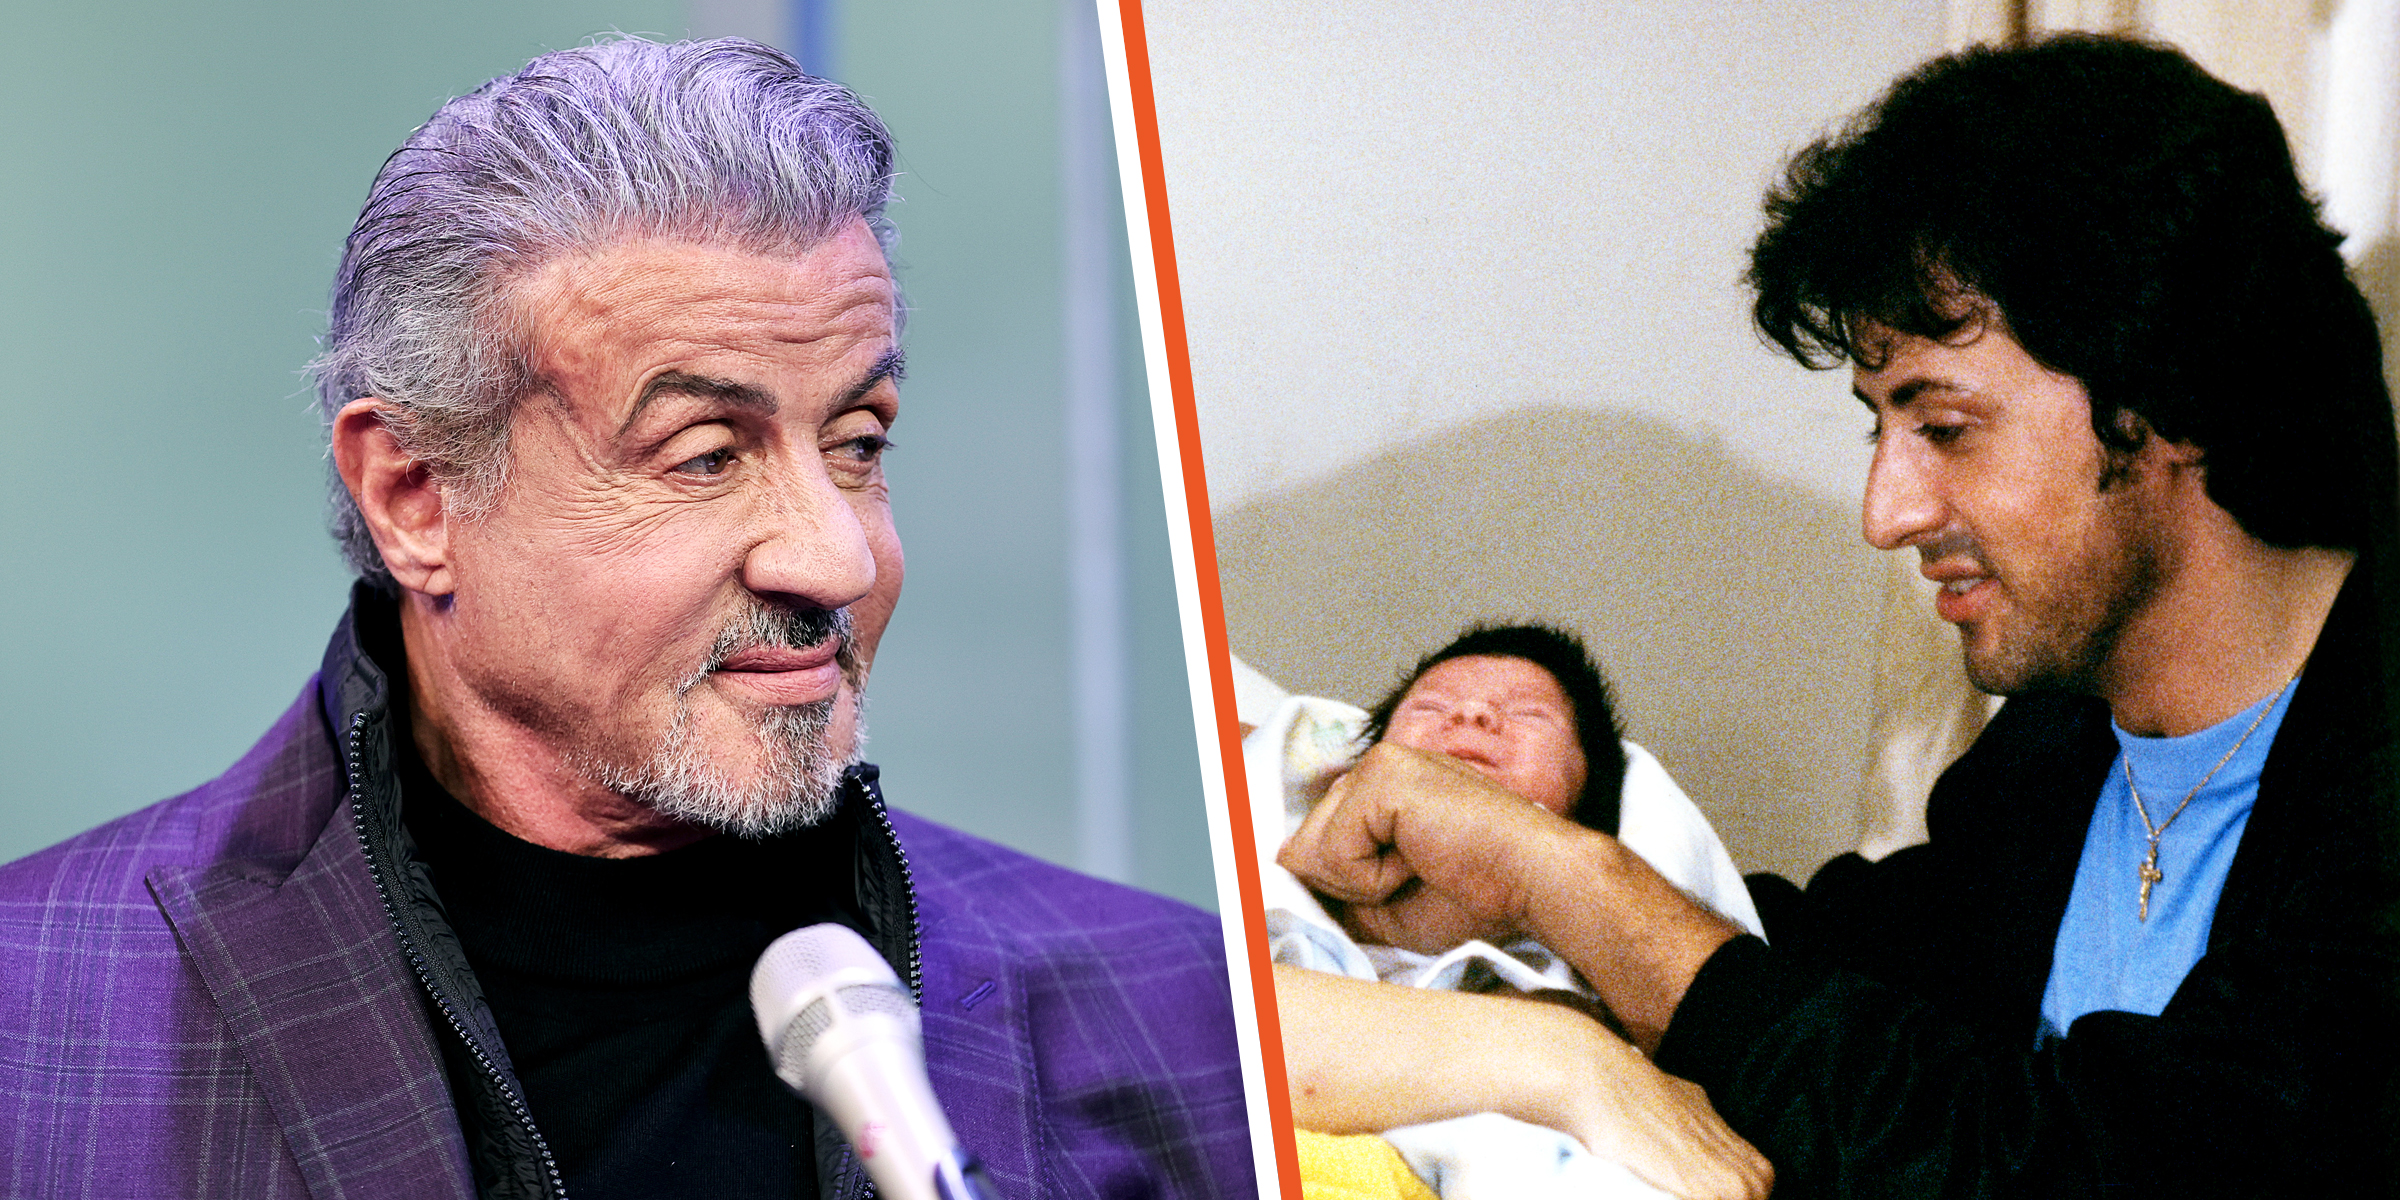 Sylvester Stallone ┃Seargeoh Stallone et Sylvester Stallone ┃Source : Getty Images